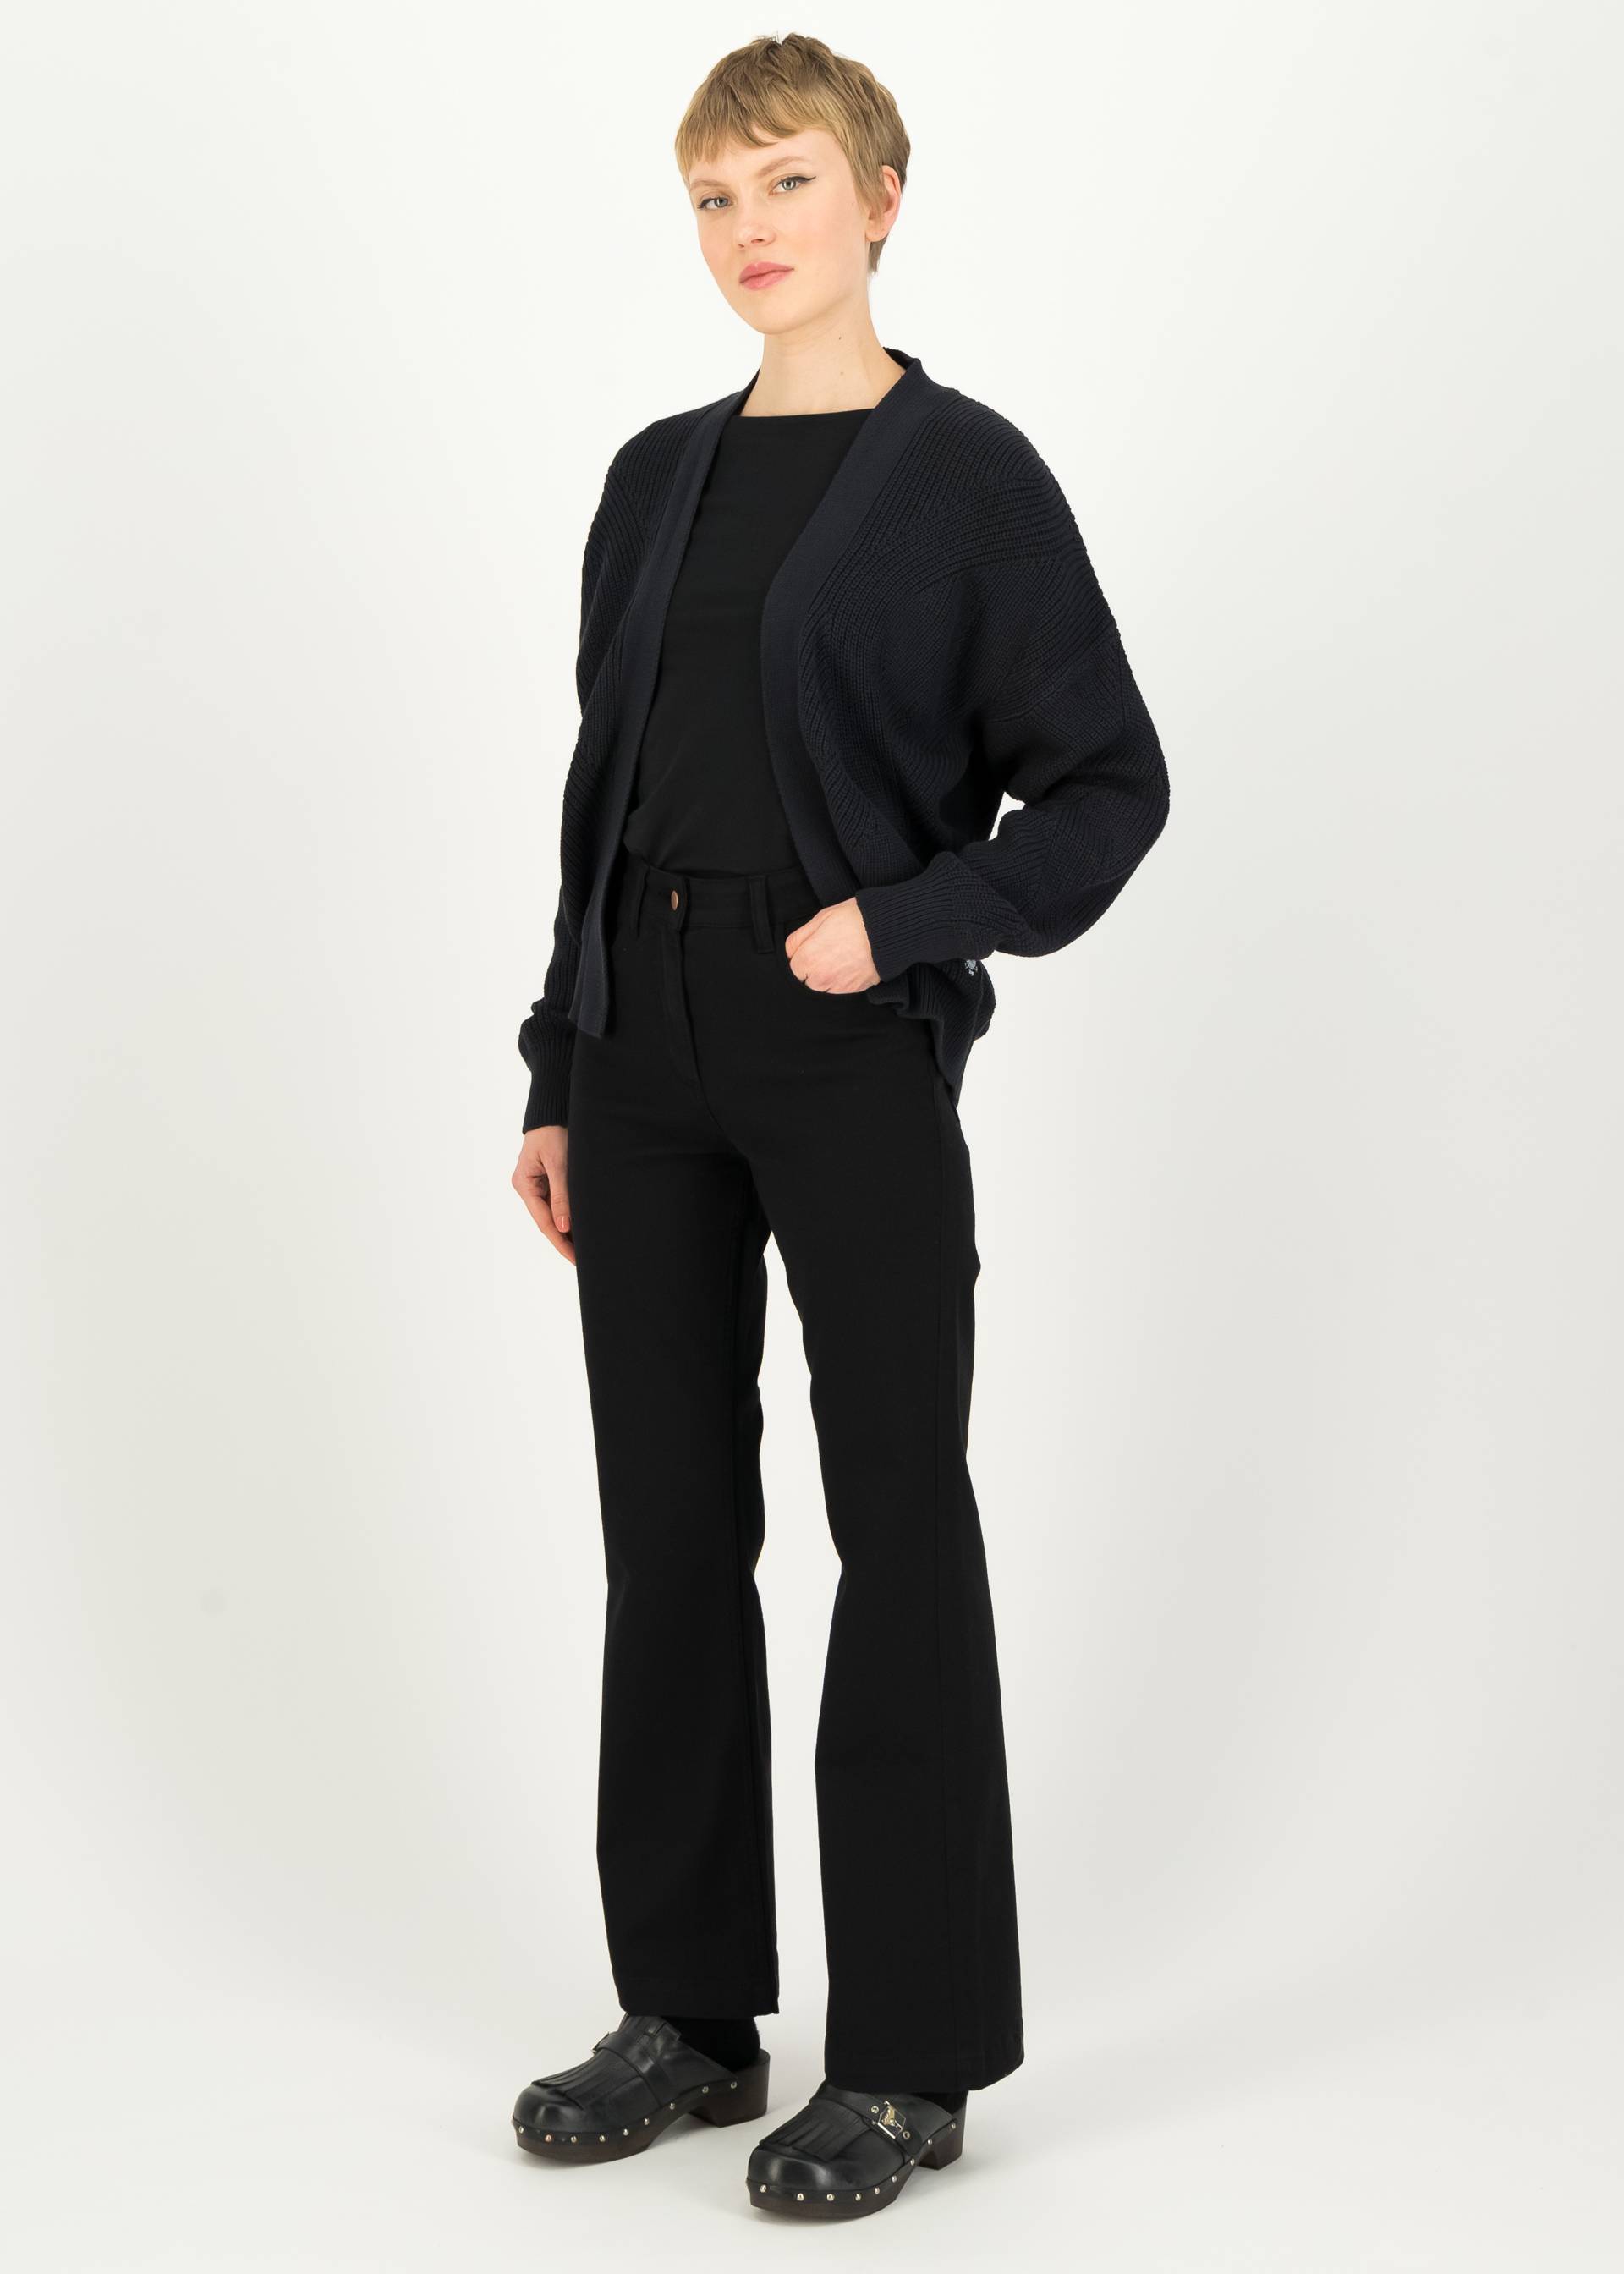 Cardigan Highway to my Heart, royal new black, Knitted Jumpers & Cardigans, Black